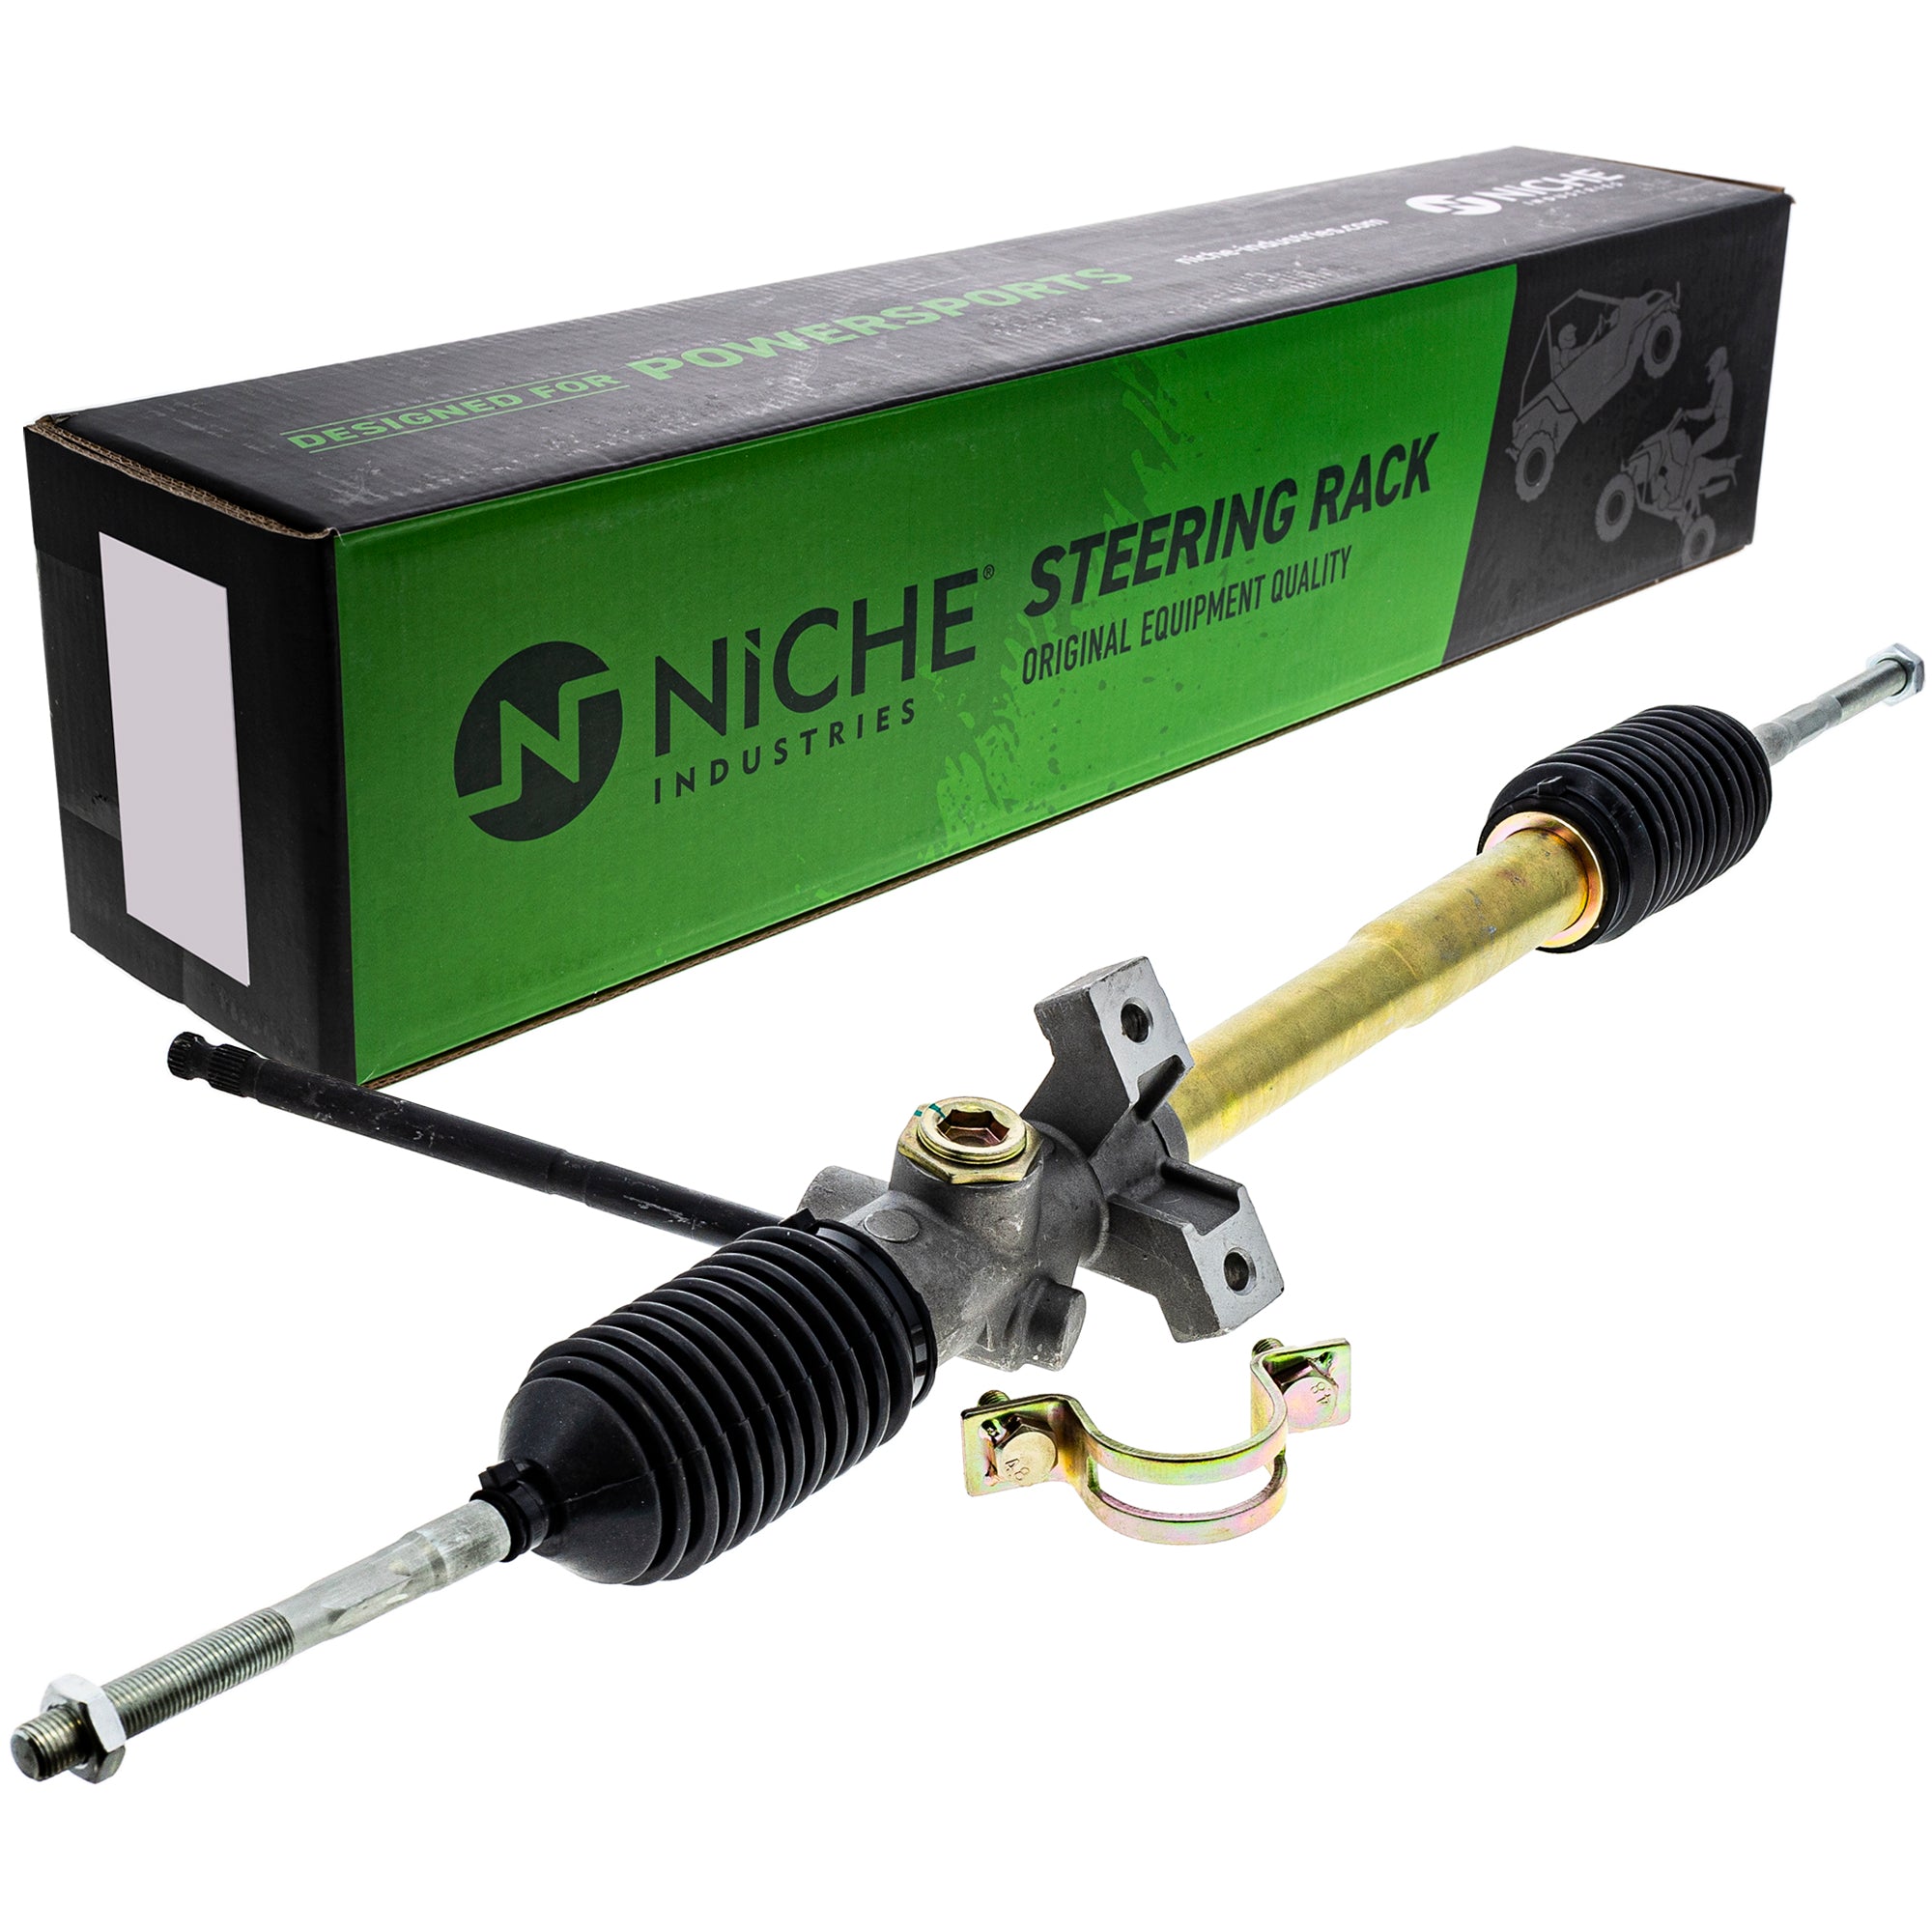 NICHE 519-CSR2250A Steering Rack Assembly for zOTHER Deere